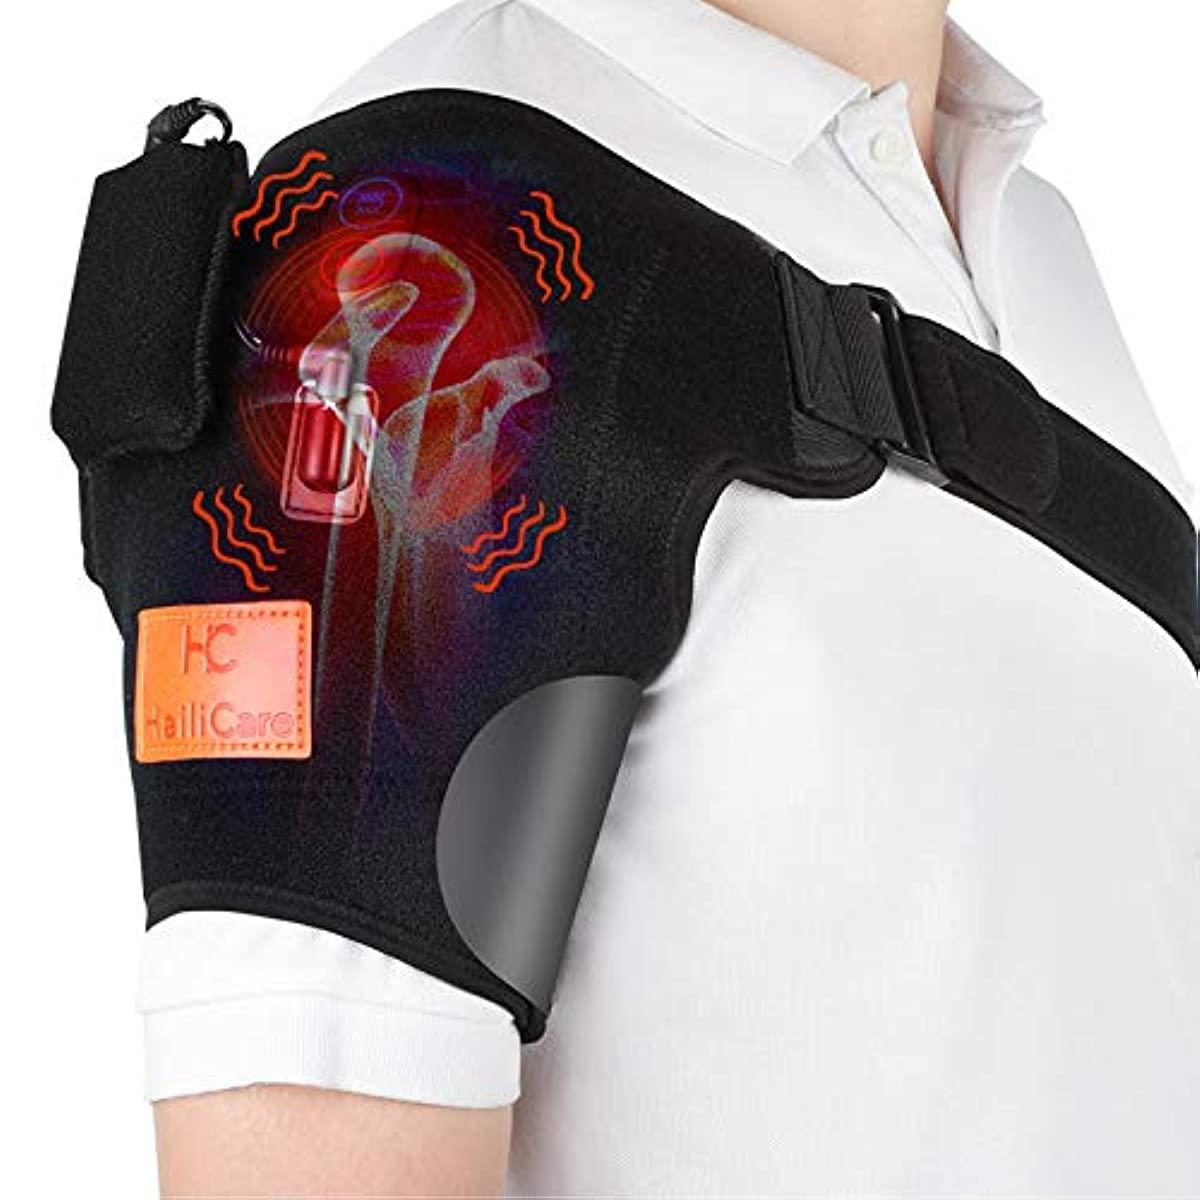 HailiCare Heating Pad for Shoulder Massager in Pakistan for Rs. 13999.00